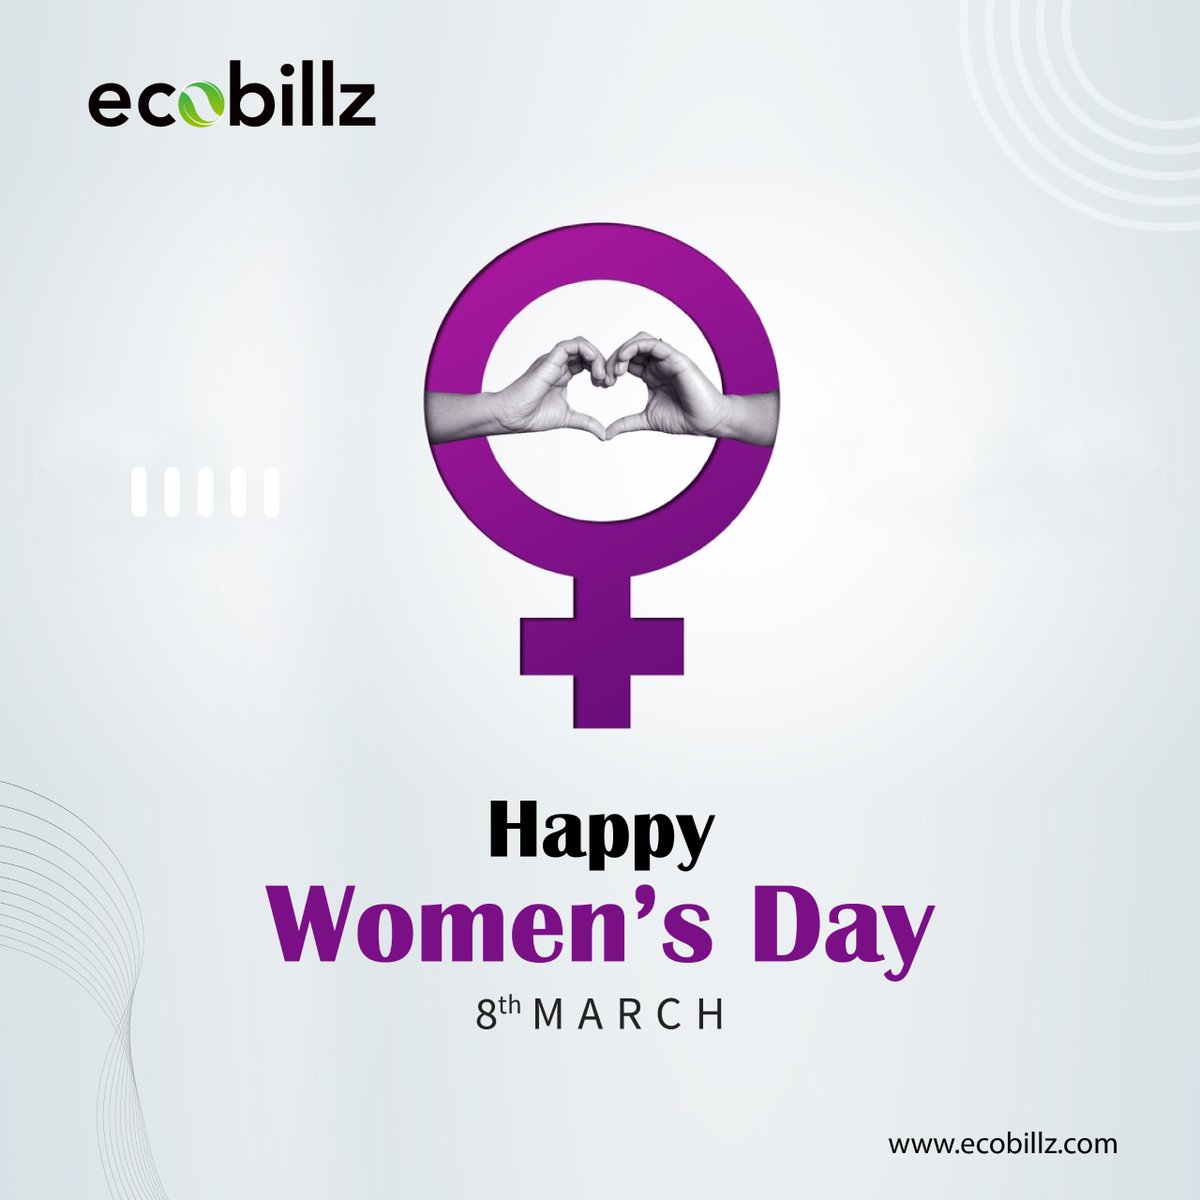 Ecobillz Private Limited wishes all the wonderful and beautiful women a very Happy and Special Women's Day!!!! Ameet Patil Nitesh Singh Rathore #women #happywomensday #womenempowerment #automation #digitization #happywomenhappyworld #betterworld